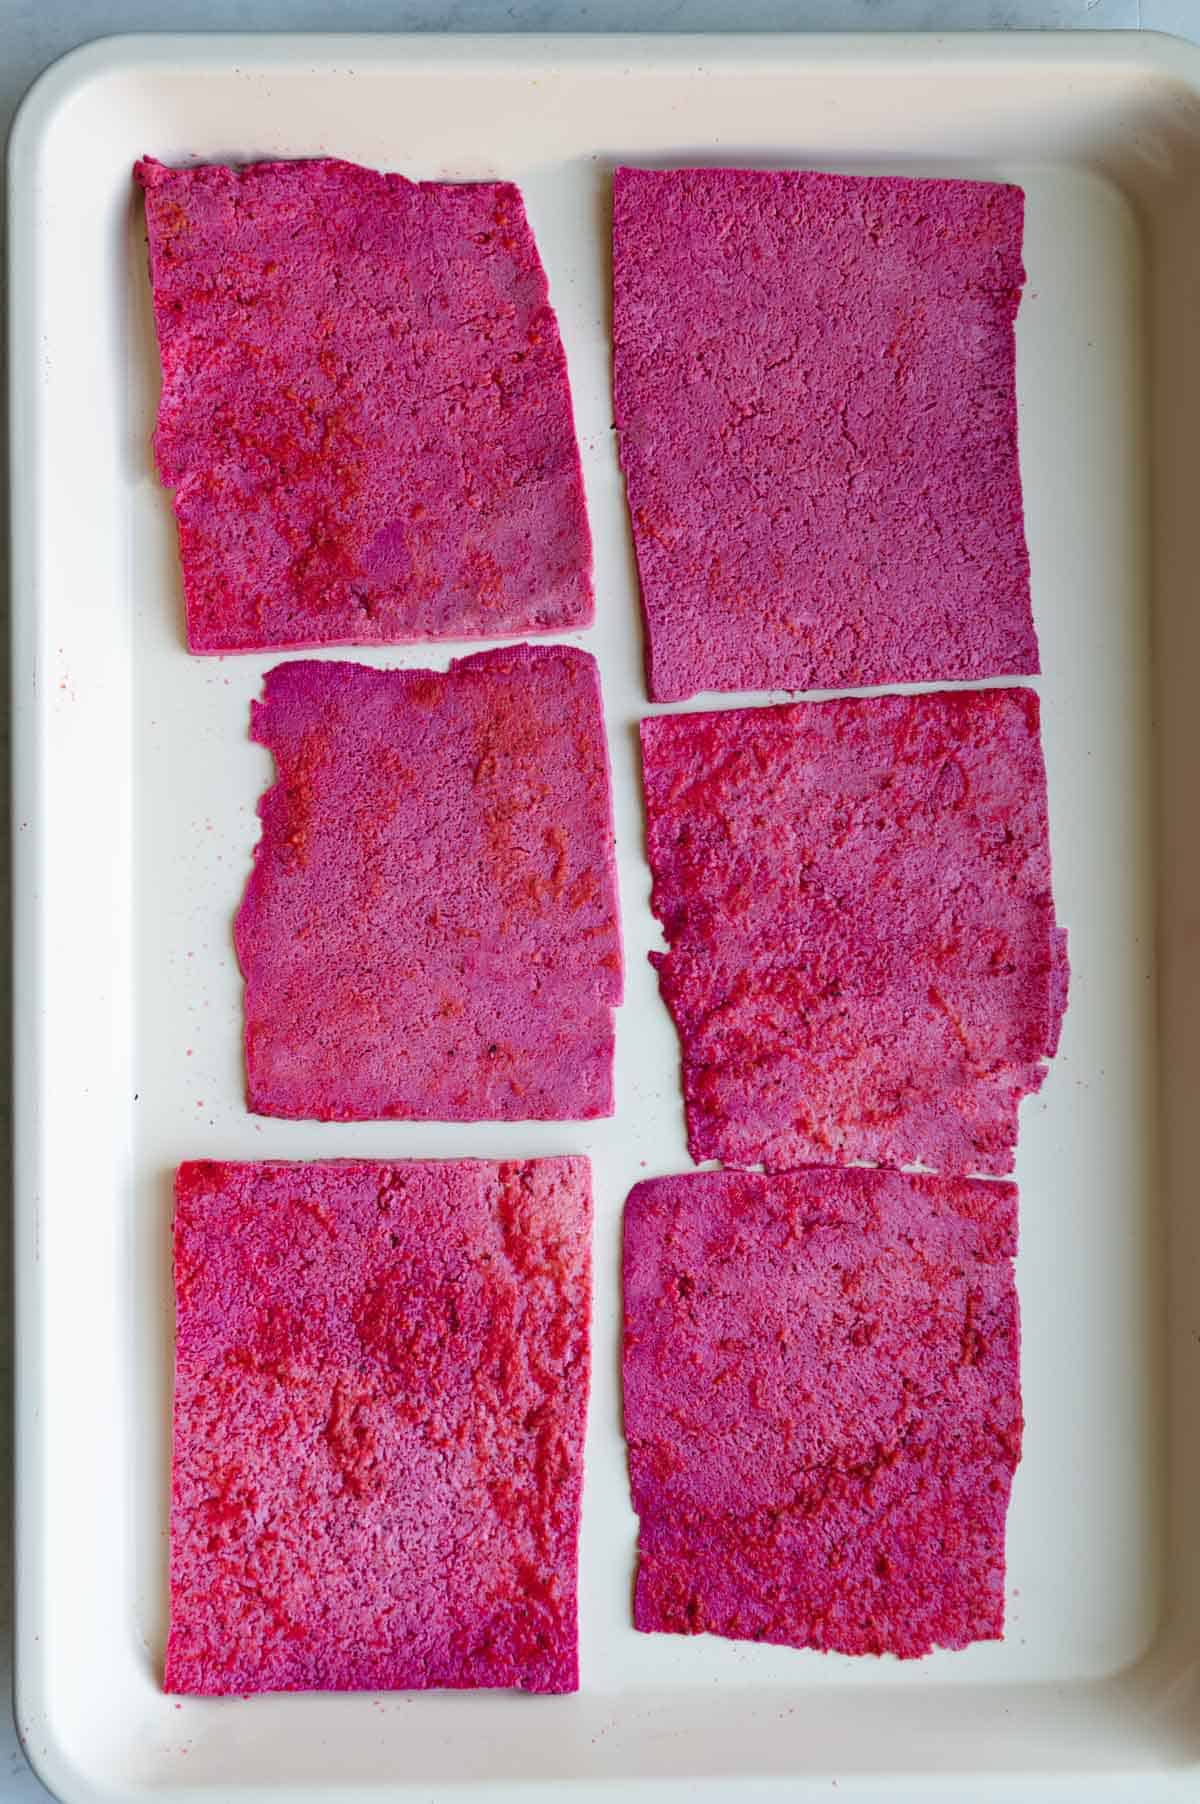 Finely sliced tofu rectangles soaked in beet brine on a white rimed baking sheet.